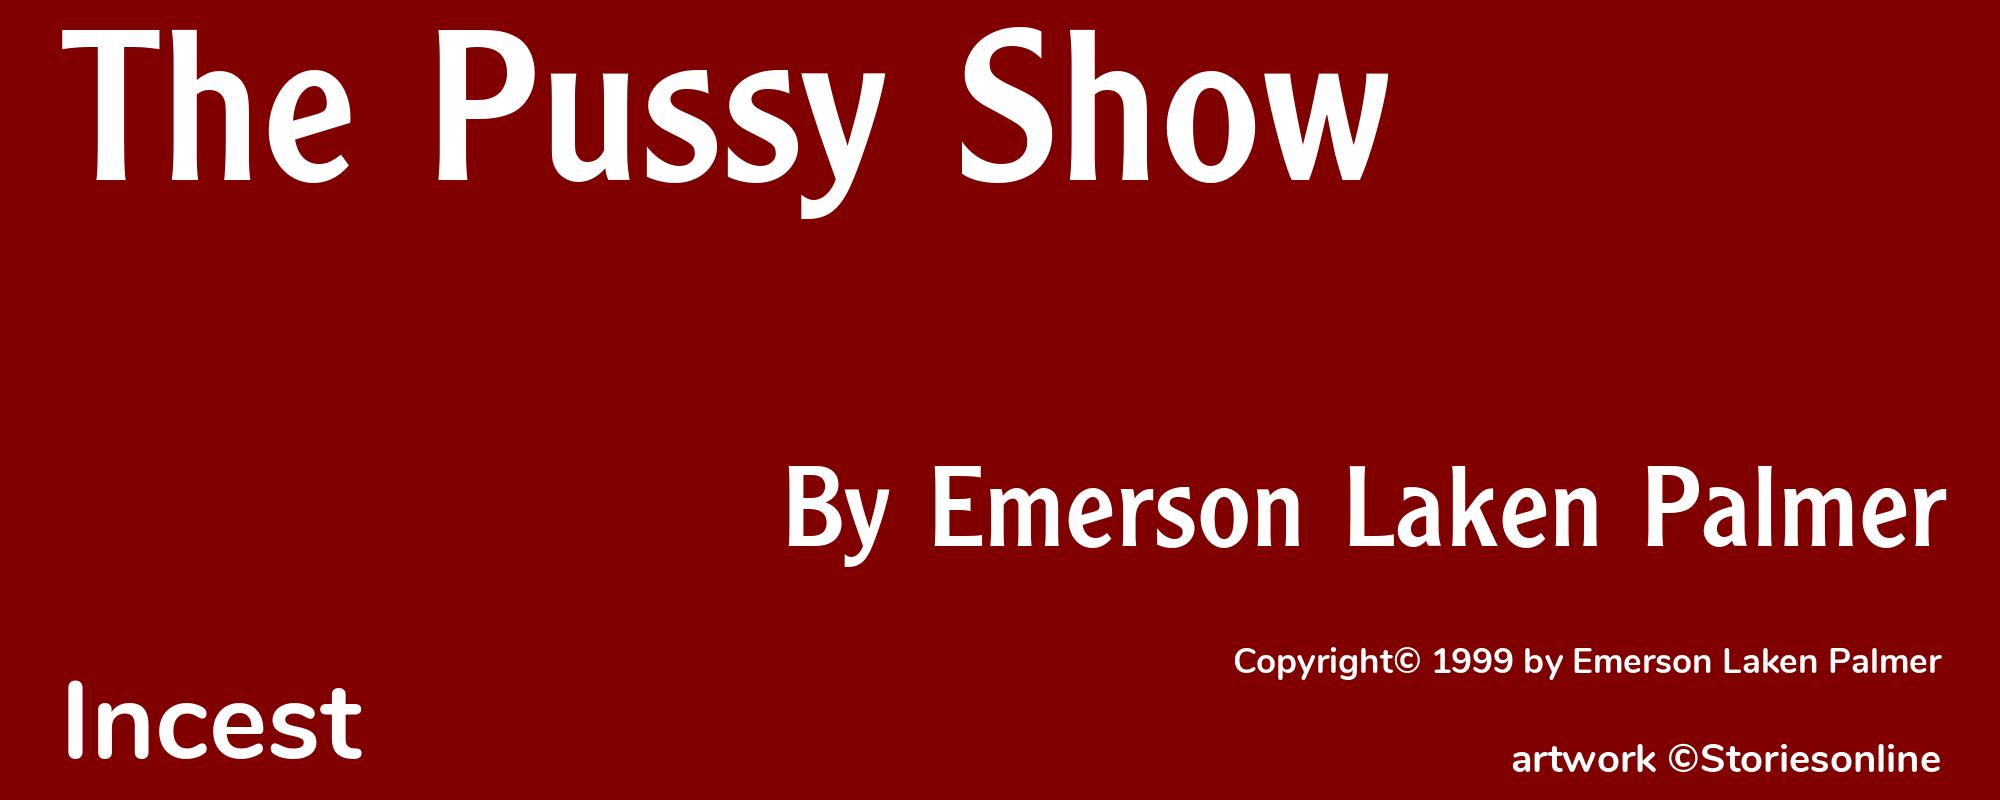 The Pussy Show - Cover